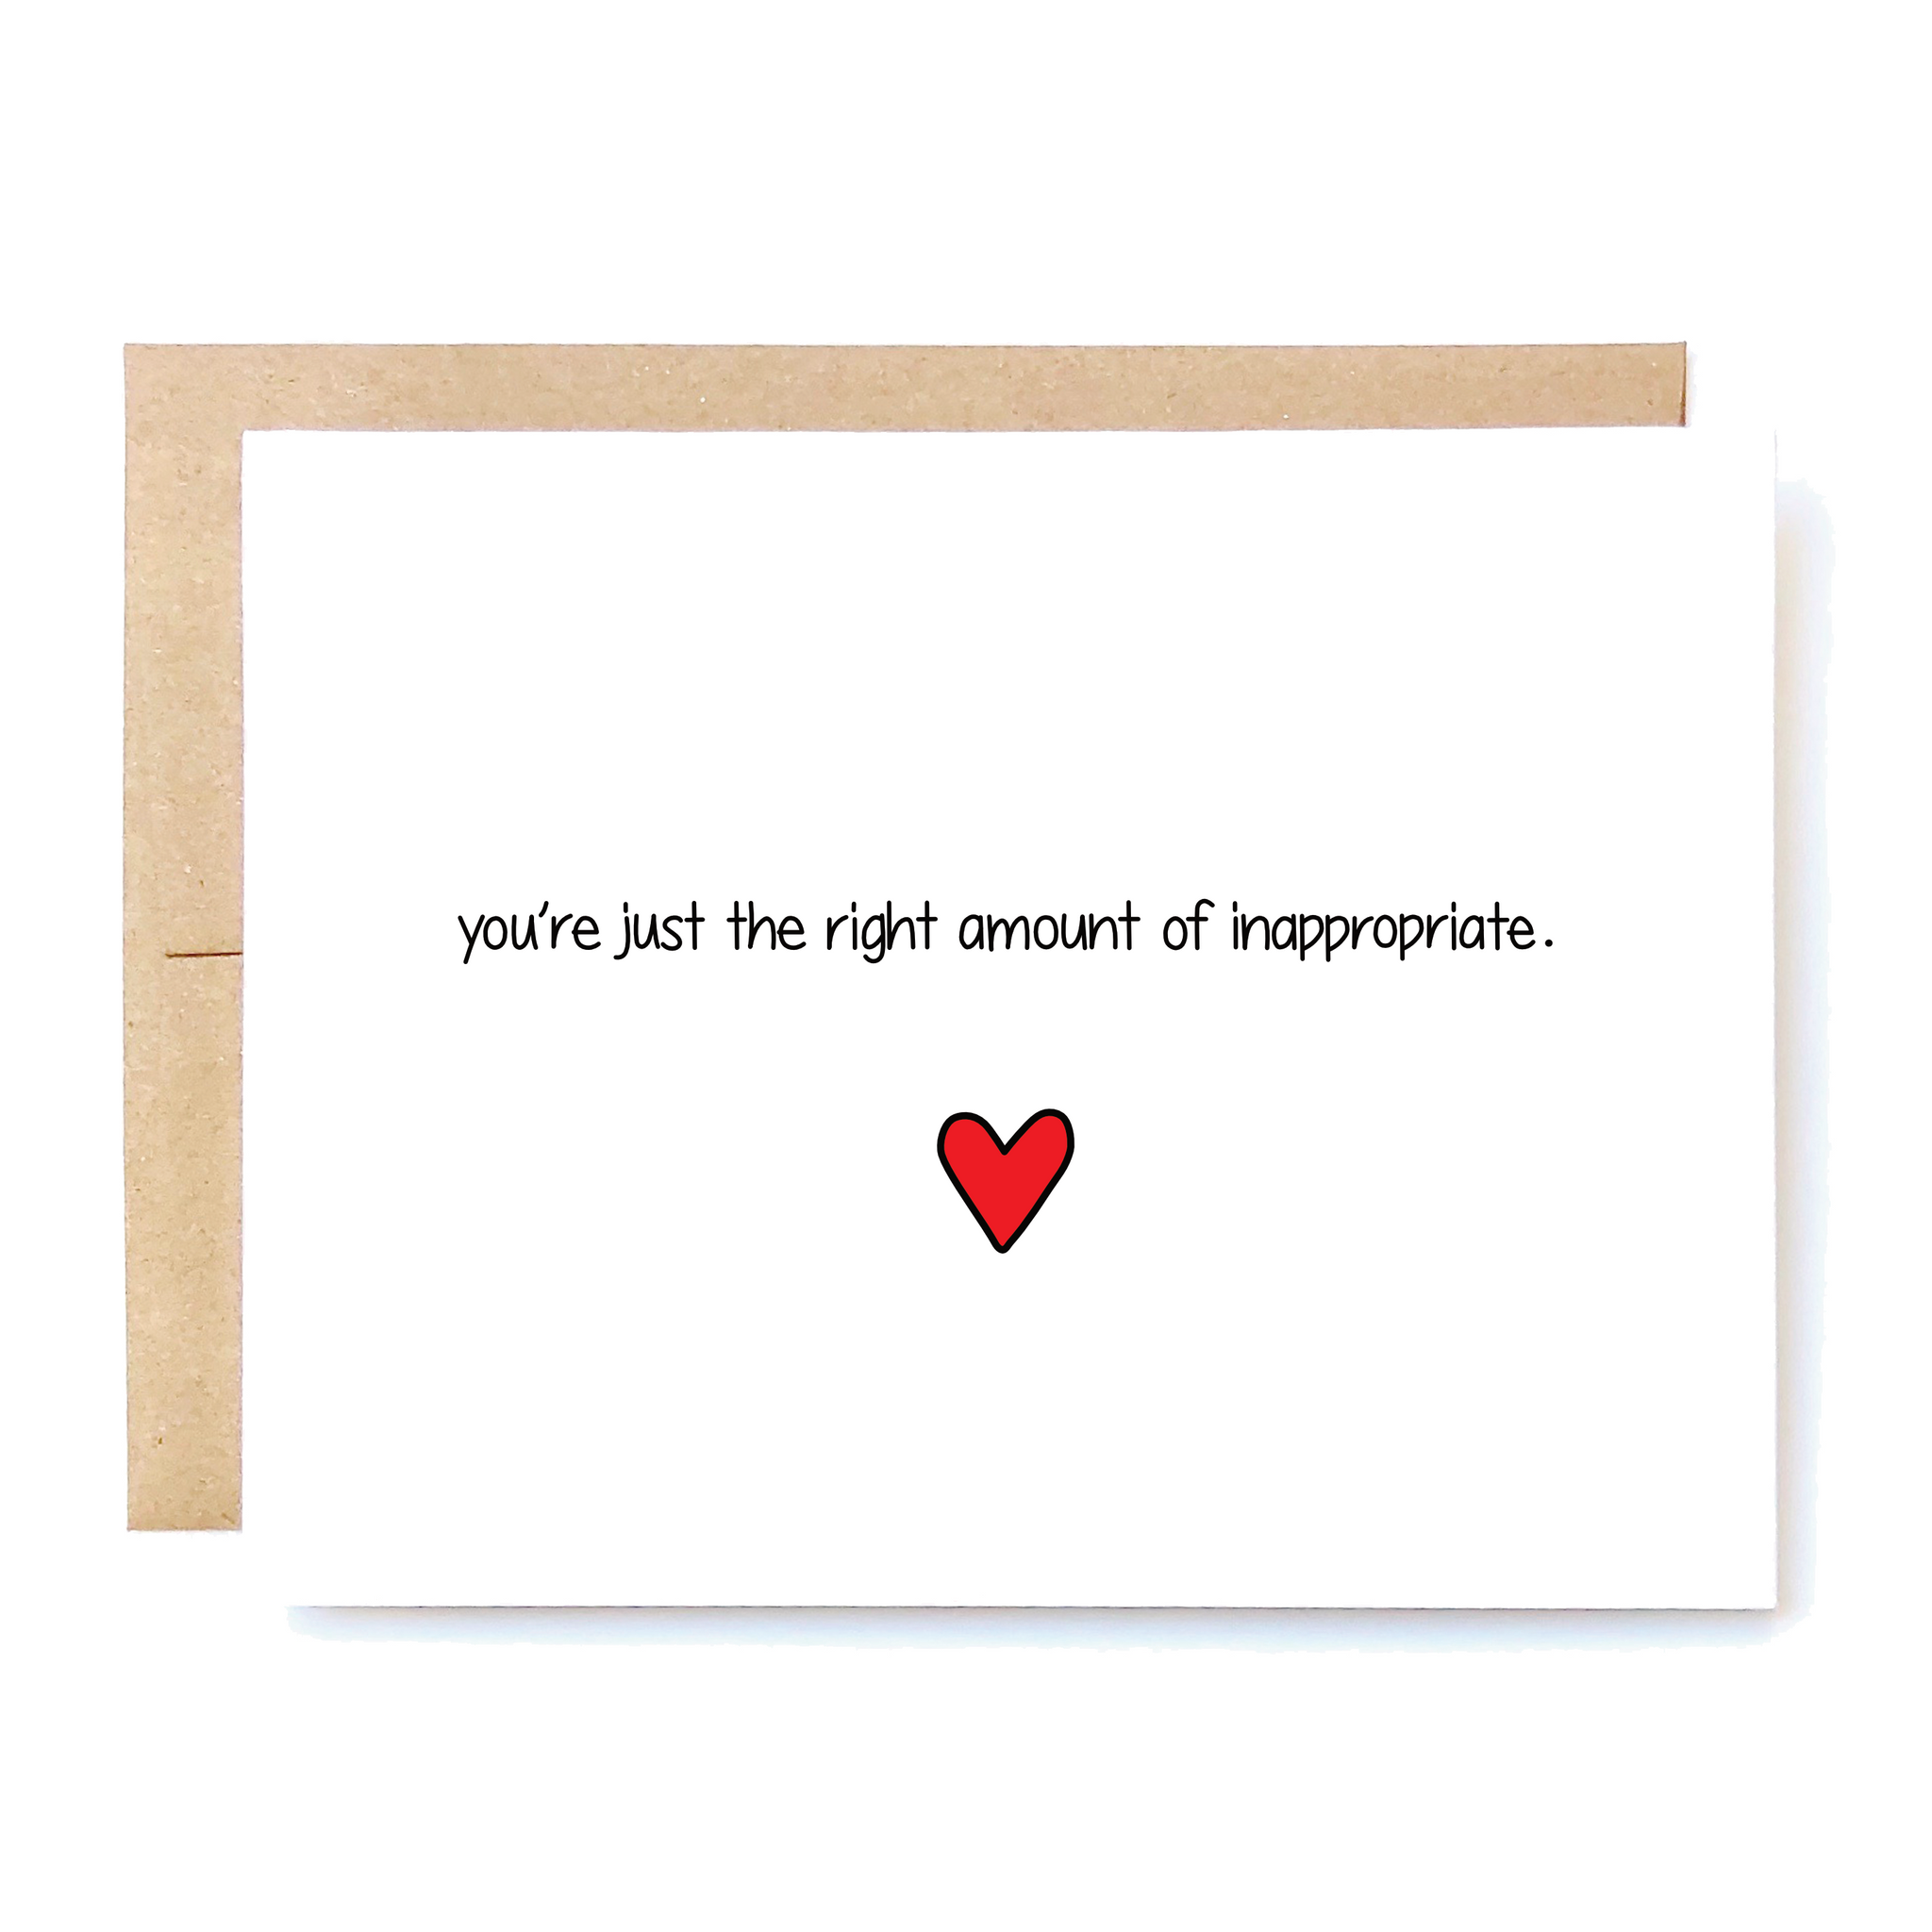 Card Front: You're just the right amount of inappropriate. 